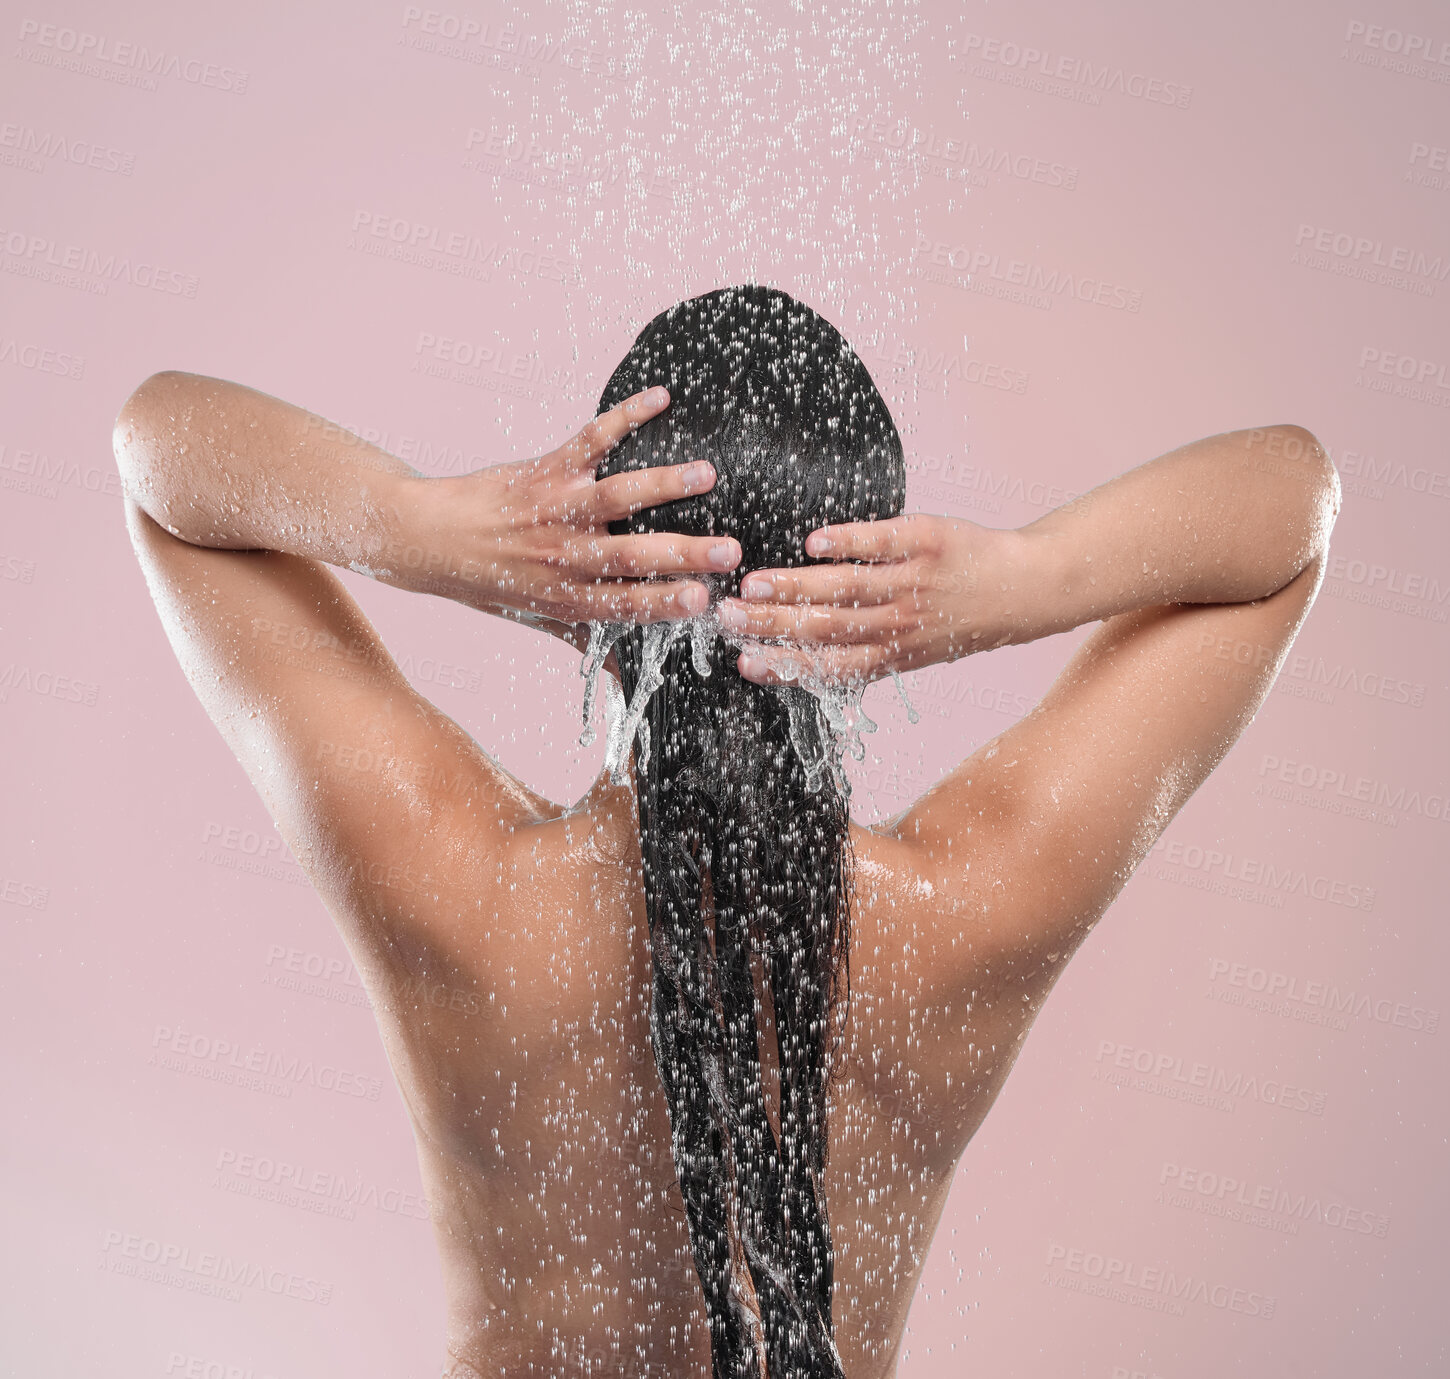 Buy stock photo Shot of a young woman washing her hair against a studio background